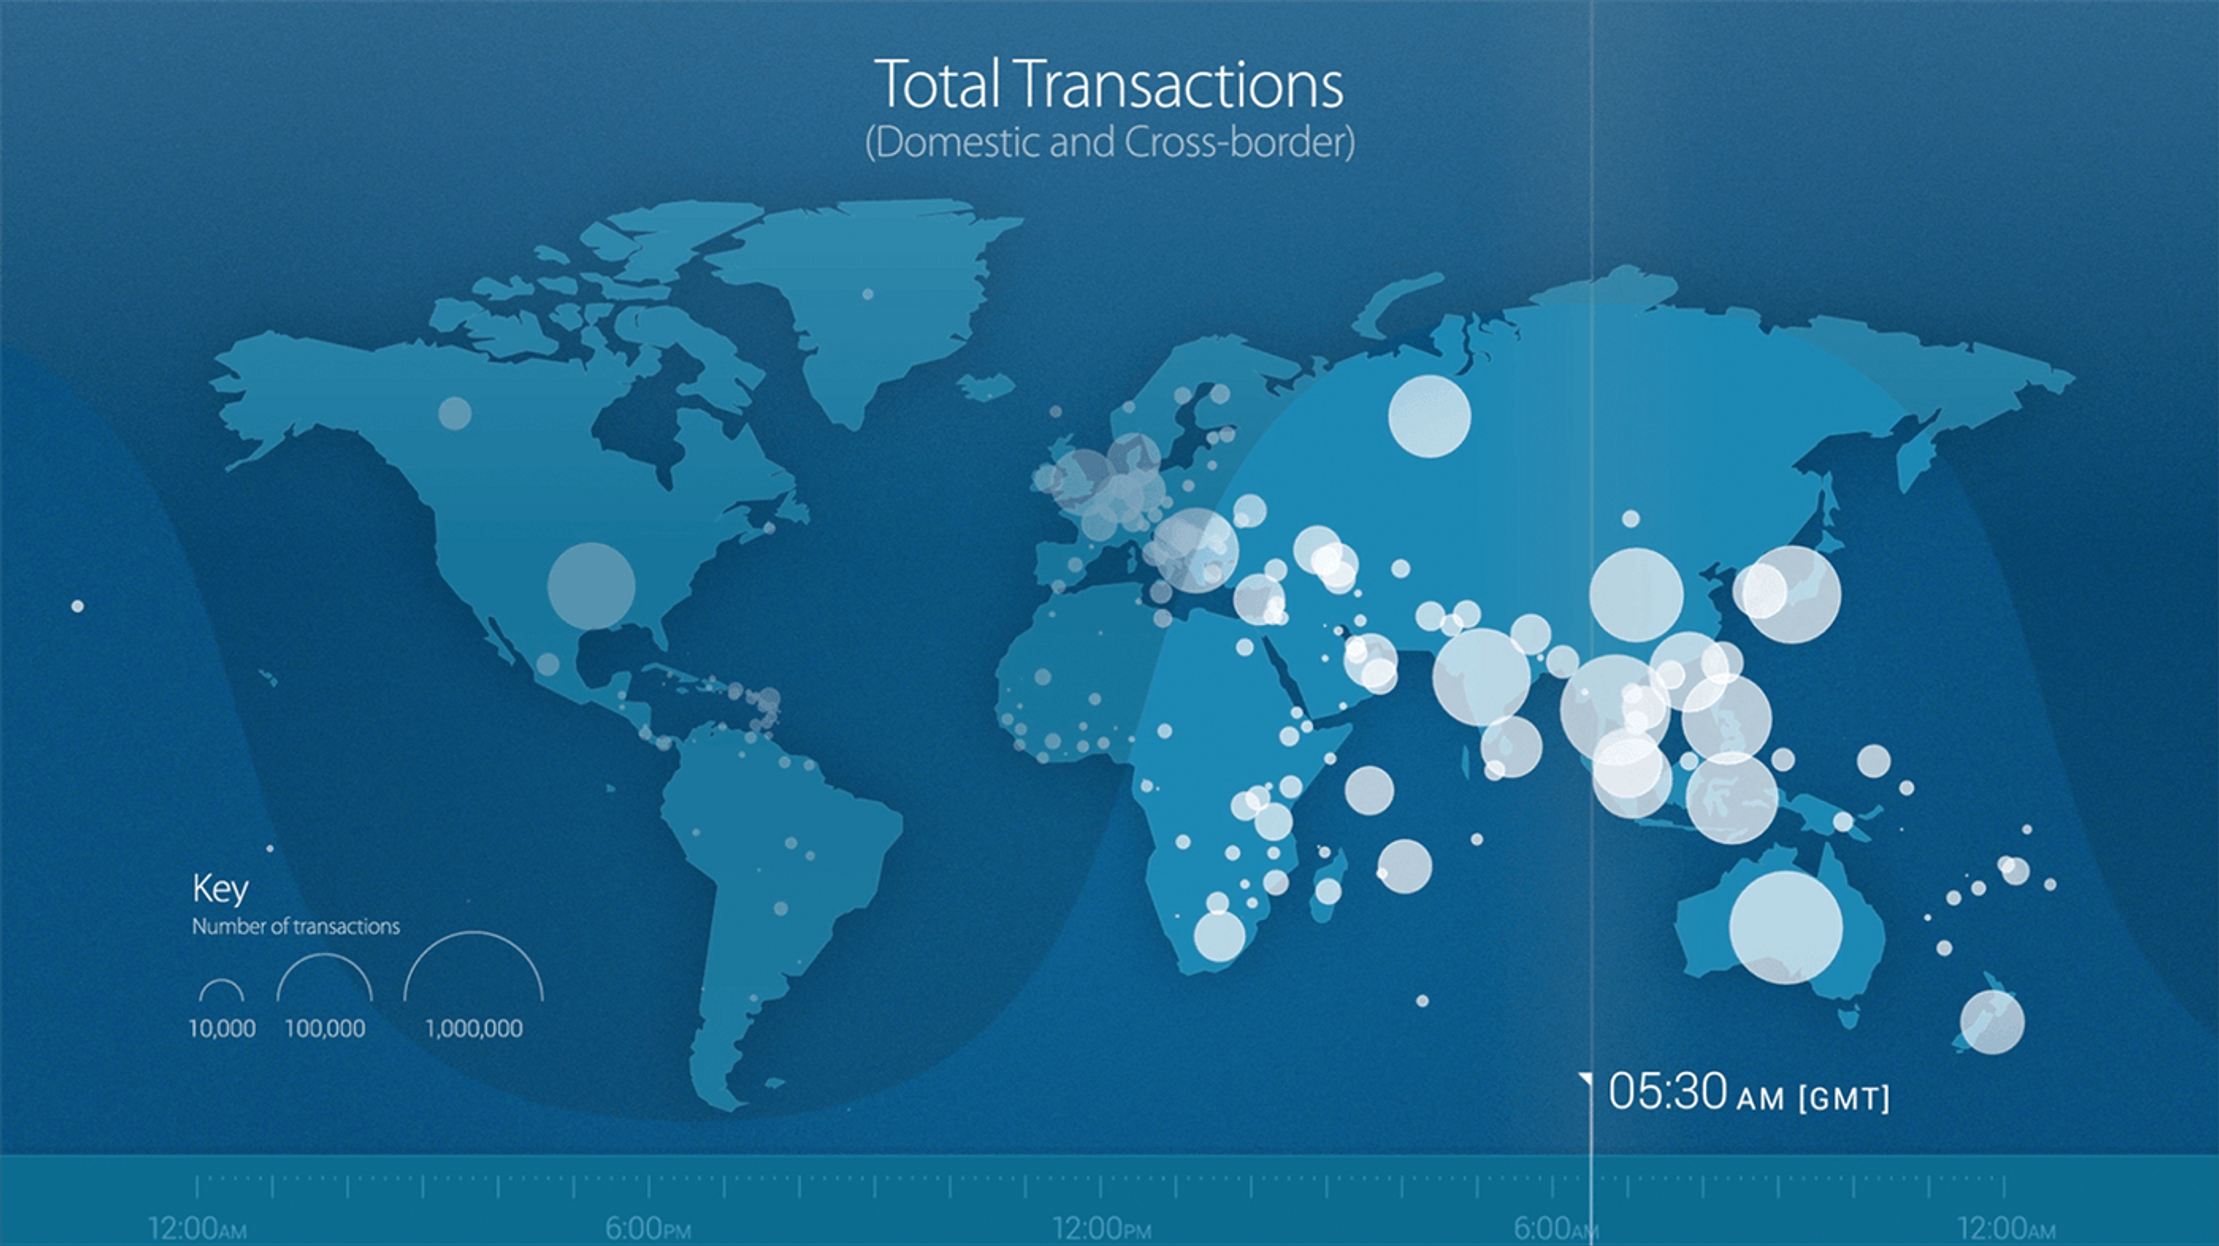 A world map of transactions around the world made using Visa. A timeline at the bottom indicates how the transactions change globally throughout the day.